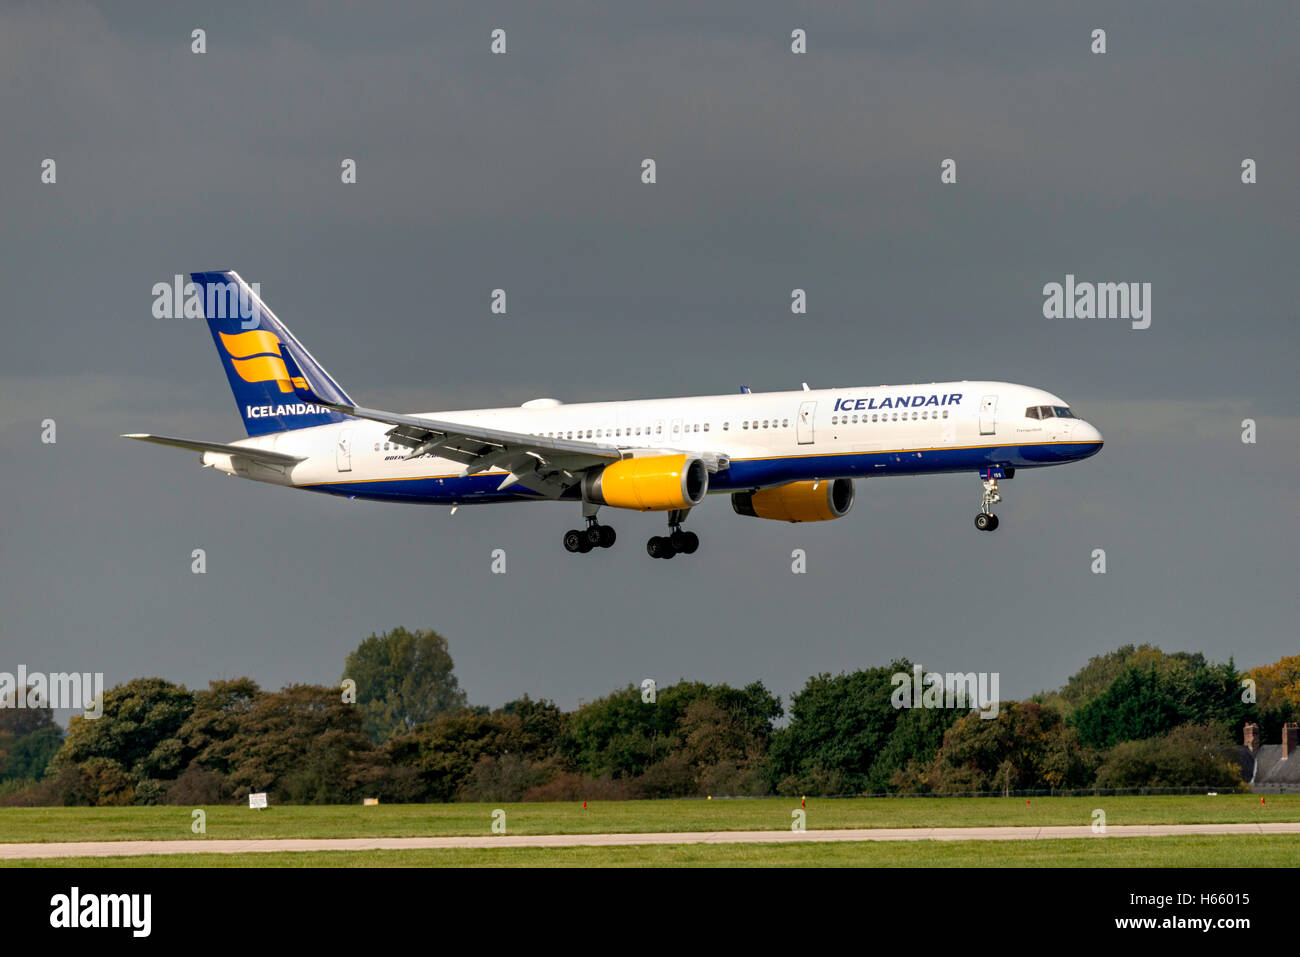 TF-ISS Icelandair Boeing 757-223 Manchester Airport England Uk. arrivals. landing. Stock Photo